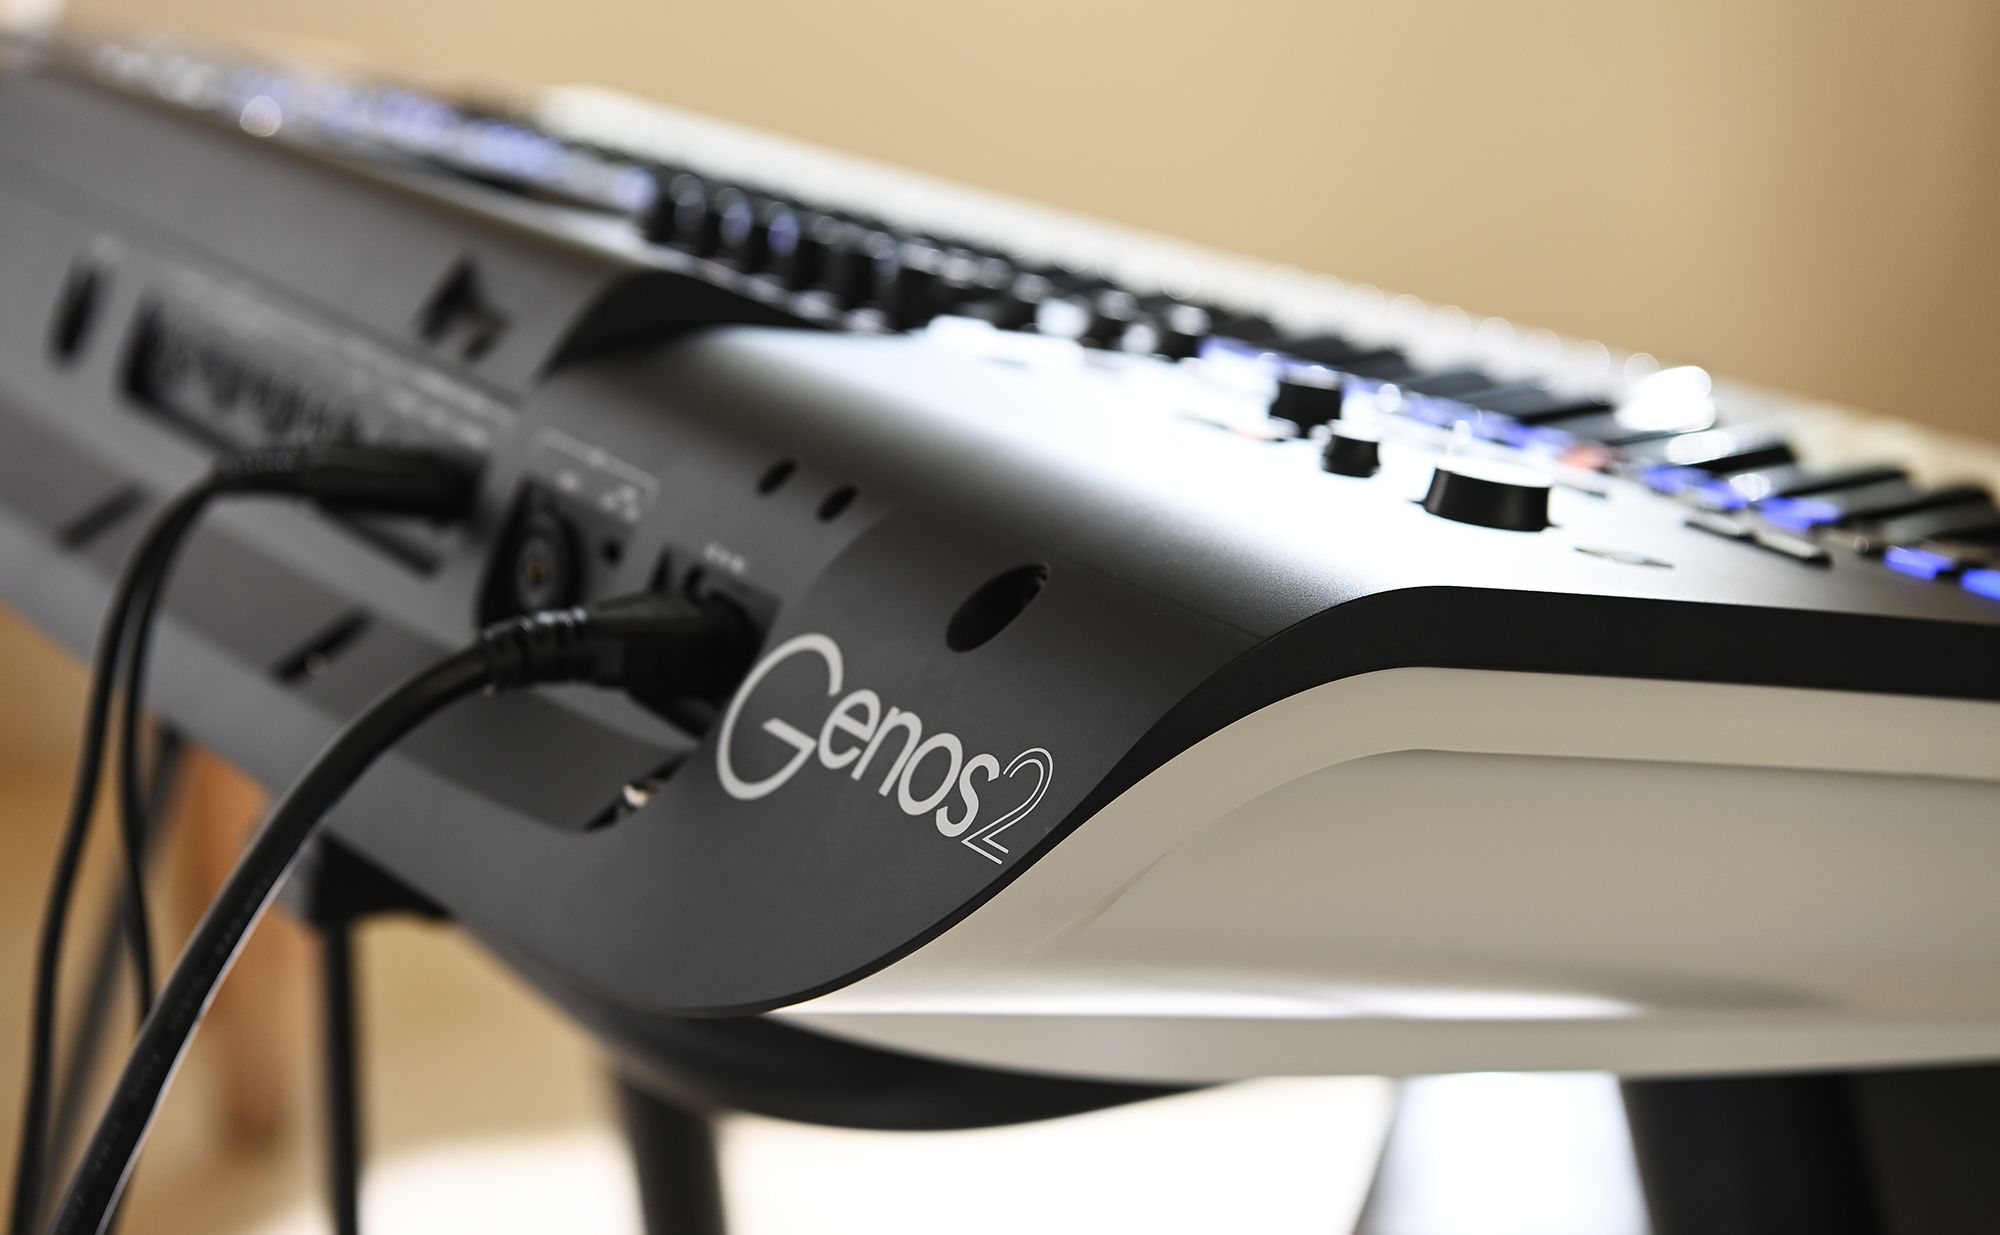 Close-up of the Genos2 logo on the back of the instrument